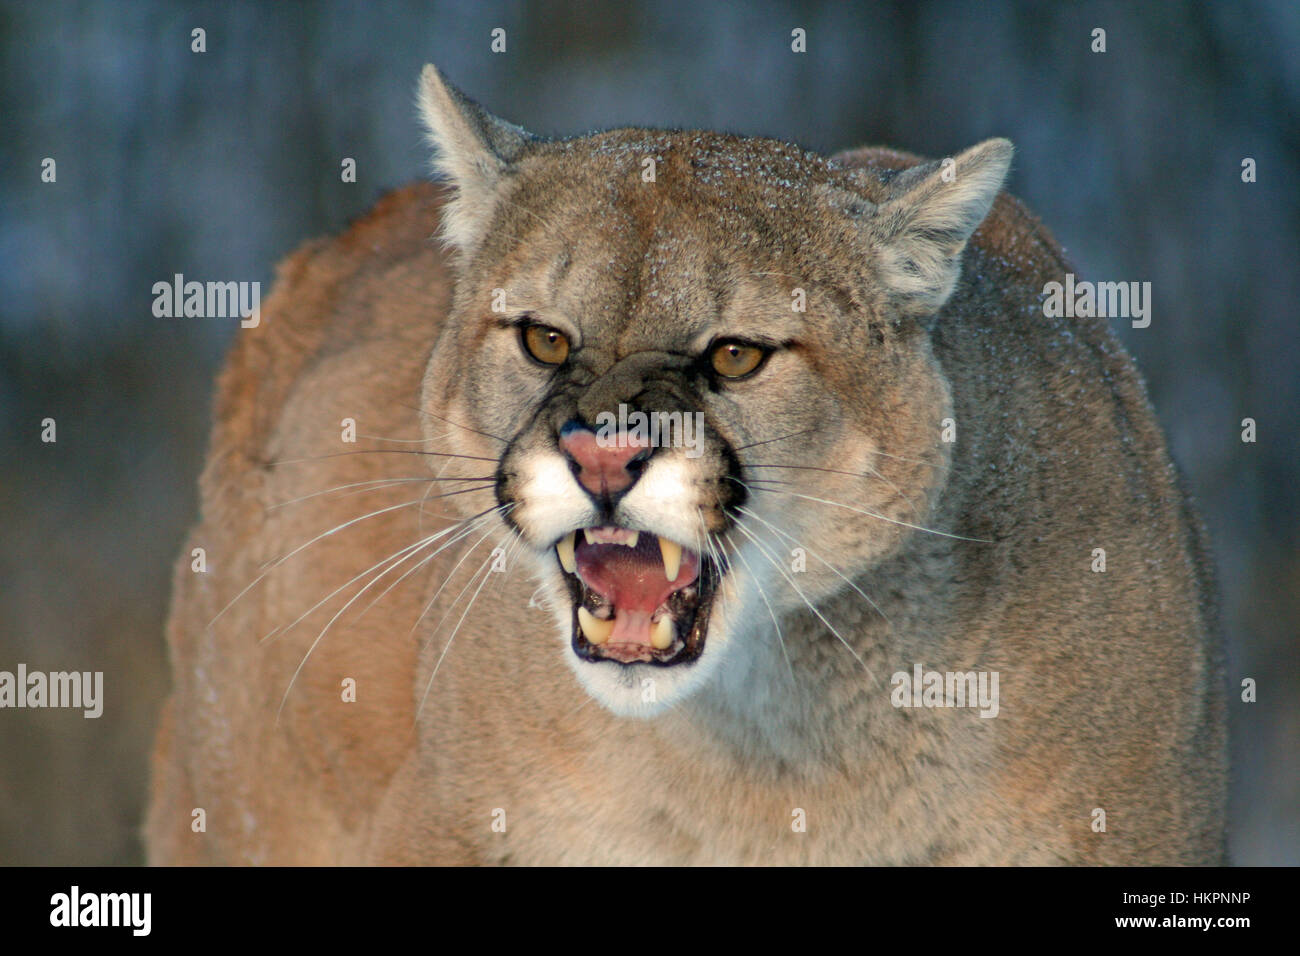 Snarling, angry cougar with fangs bared Stock Photo